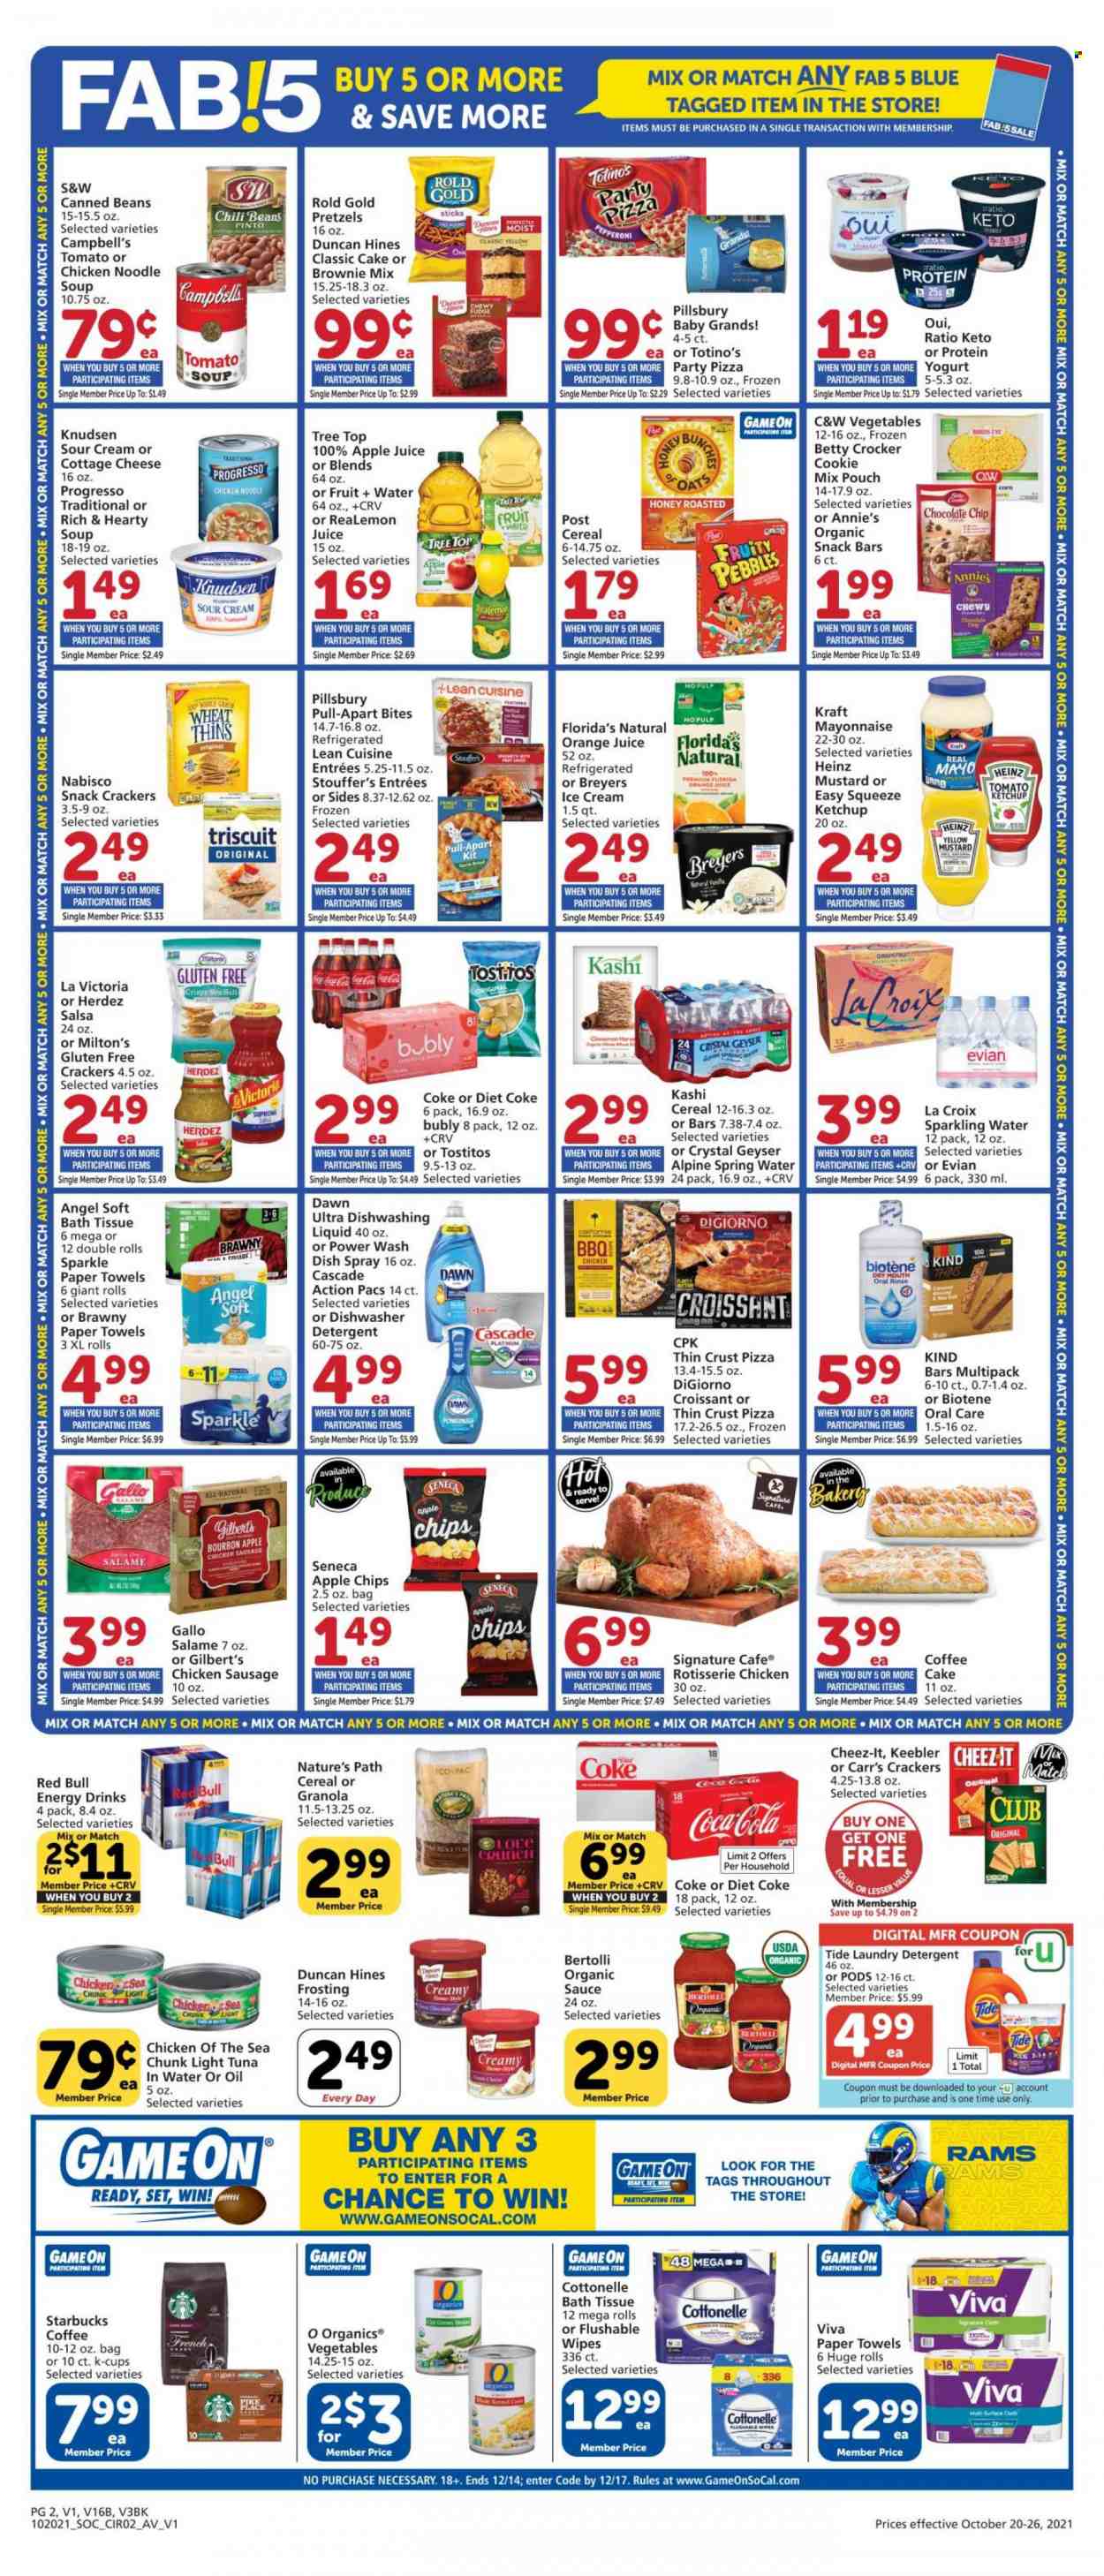 thumbnail - Vons Flyer - 10/20/2021 - 10/26/2021 - Sales products - pretzels, cake, croissant, brownie mix, grapefruits, tuna, Campbell's, tomato soup, pizza, chicken roast, soup, sauce, Pillsbury, noodles, Progresso, Lean Cuisine, Annie's, Kraft®, Bertolli, sausage, pepperoni, chicken sausage, Gilbert’s, cottage cheese, yoghurt, sour cream, mayonnaise, ice cream, Stouffer's, fudge, snack, crackers, snack bar, Florida's Natural, Keebler, Thins, Cheez-It, Tostitos, frosting, oats, Heinz, chili beans, light tuna, Chicken of the Sea, cereals, granola, Fruity Pebbles, cinnamon, mustard, ketchup, salsa, honey, apple juice, Coca-Cola, orange juice, juice, energy drink, Diet Coke, Red Bull, spring water, sparkling water, Evian, coffee, Starbucks, coffee capsules, K-Cups, bourbon, wipes, bath tissue, Cottonelle, kitchen towels, paper towels, detergent, Cascade, Tide, laundry detergent, dishwashing liquid, Biotene. Page 2.